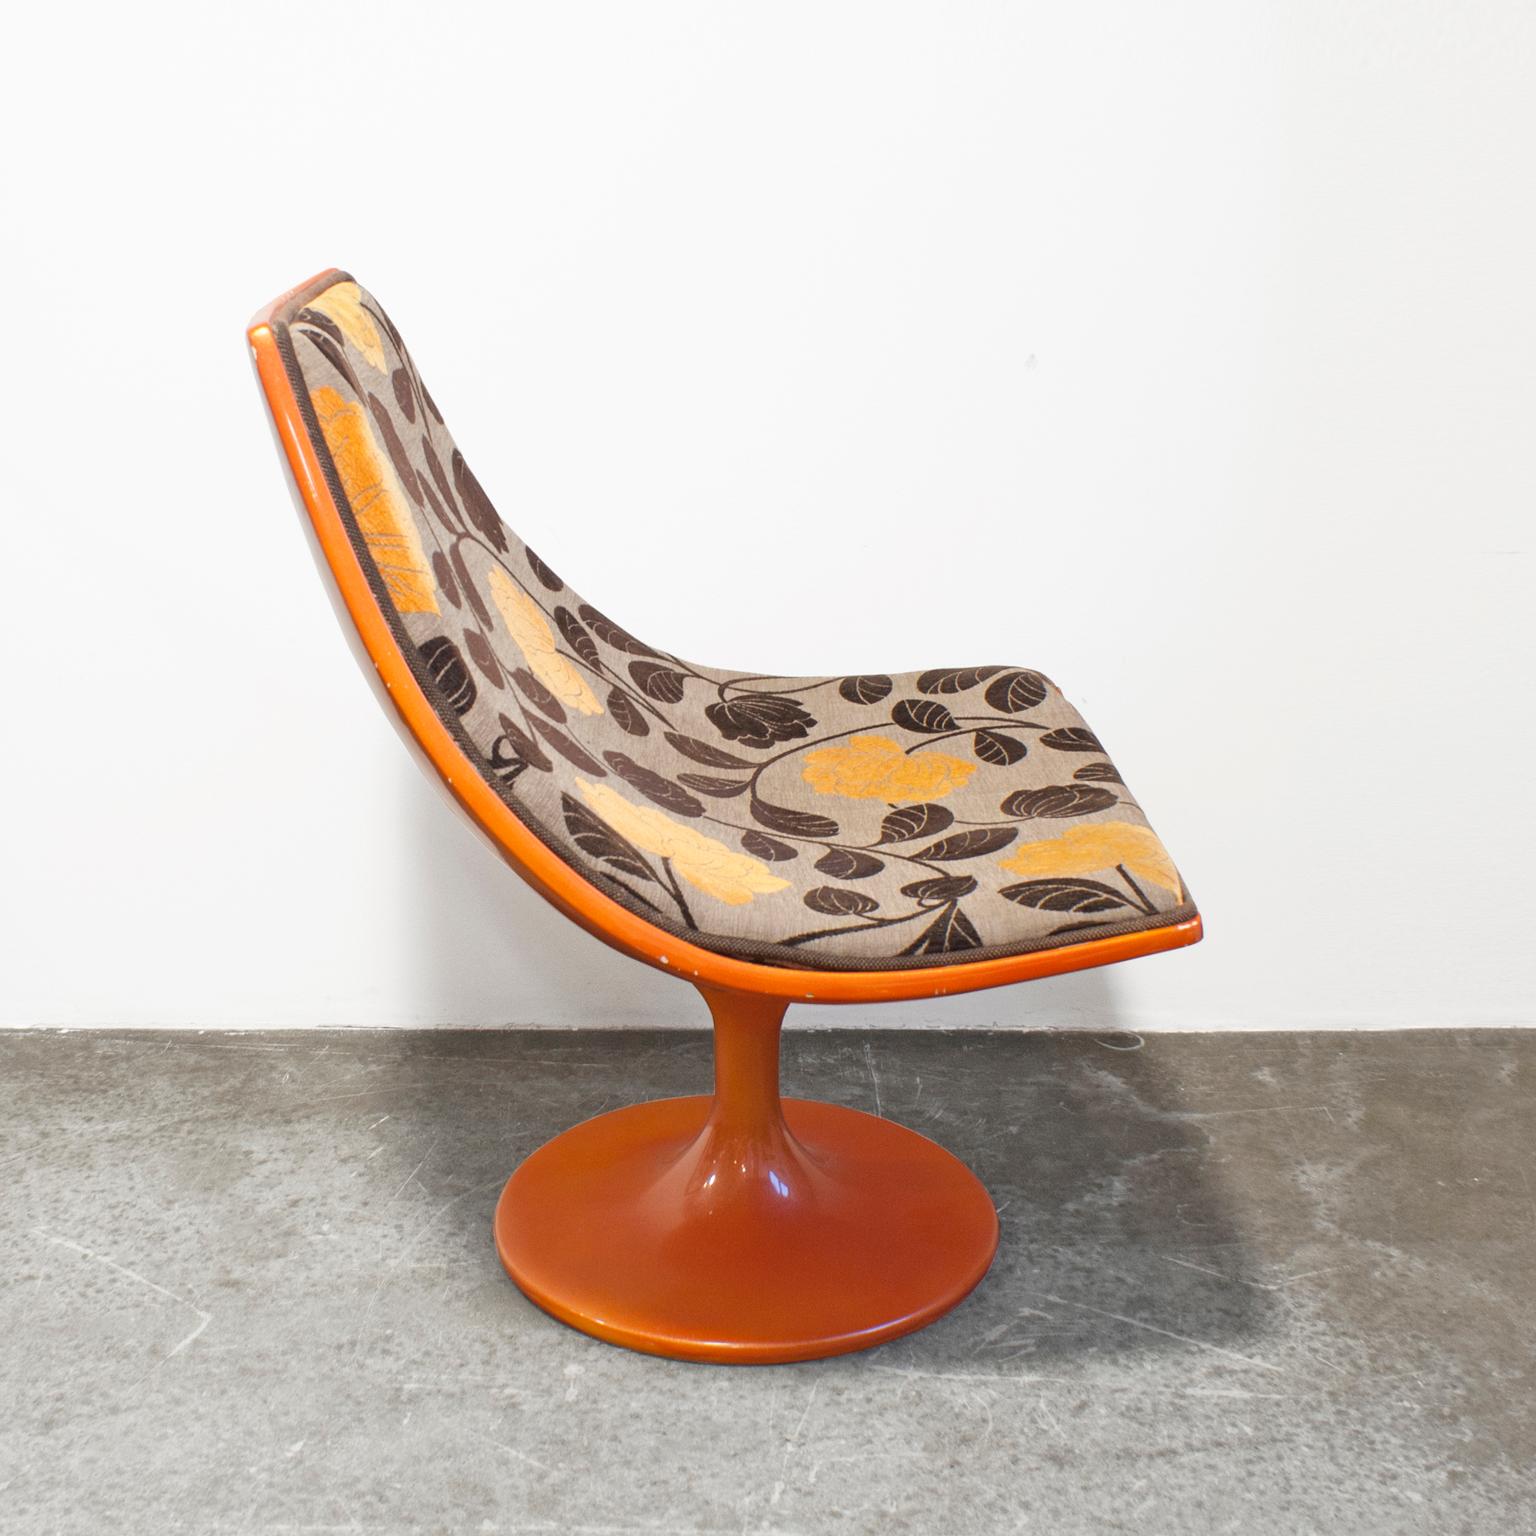 Set of two fiberglass orange tulip lounge chairs with a pedestal shape foot in lacquered orange aluminum Seat structure in orange fiberglass. Minor damages in the fiberglass of both chairs. The chairs are upholstered with yellow and brown floral